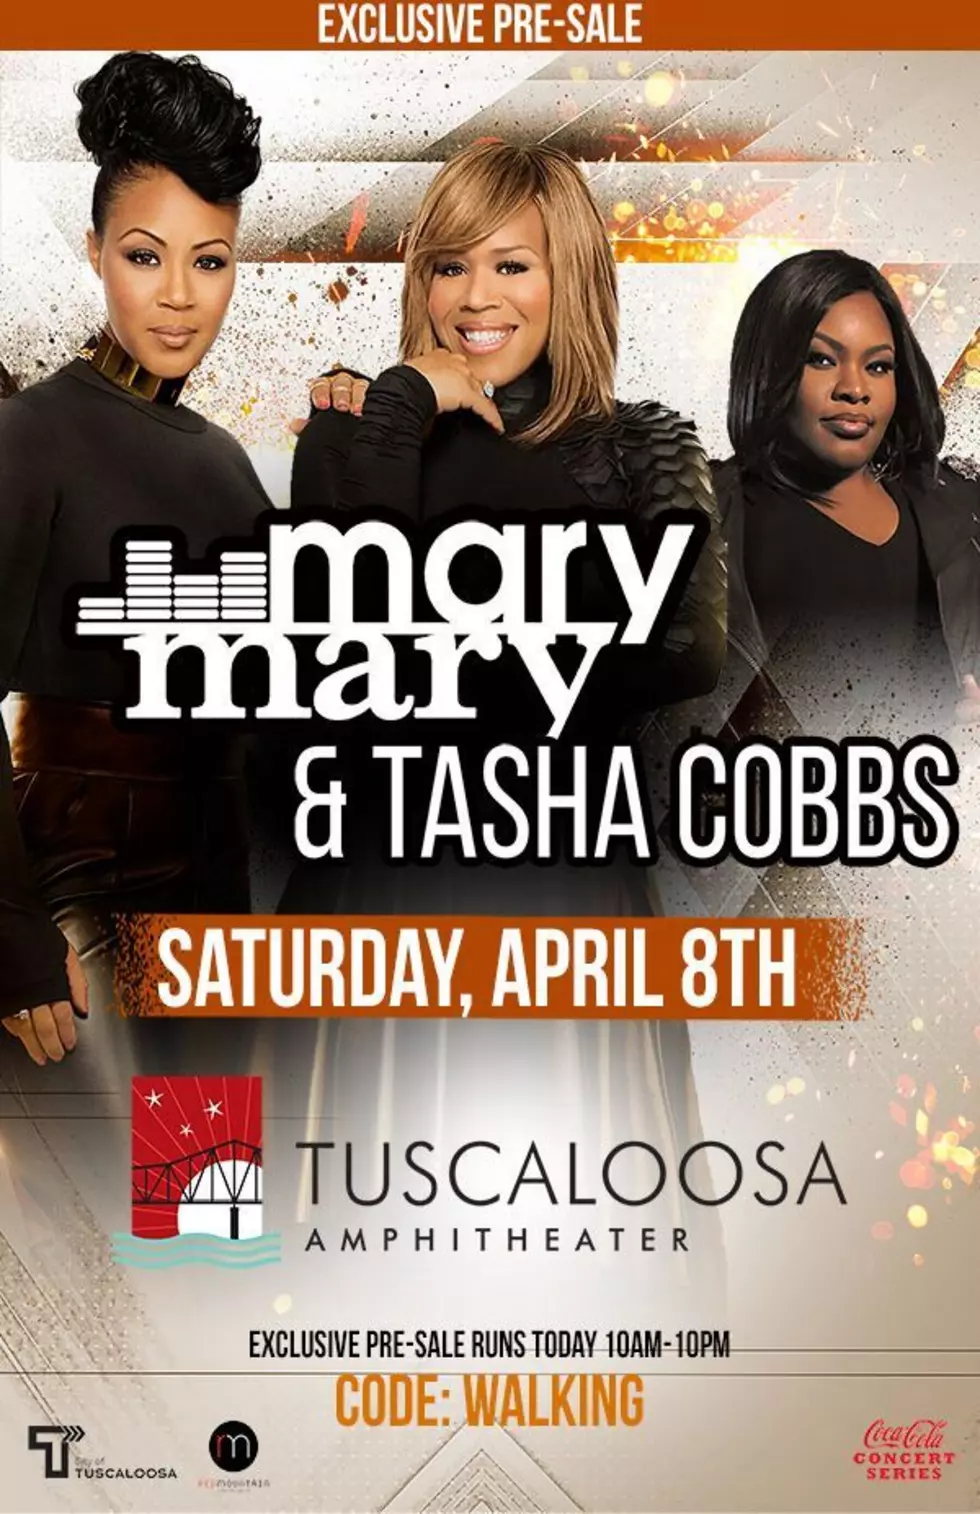 Get the Best Seats In The House To See Mary Mary In Concert This Saturday Night